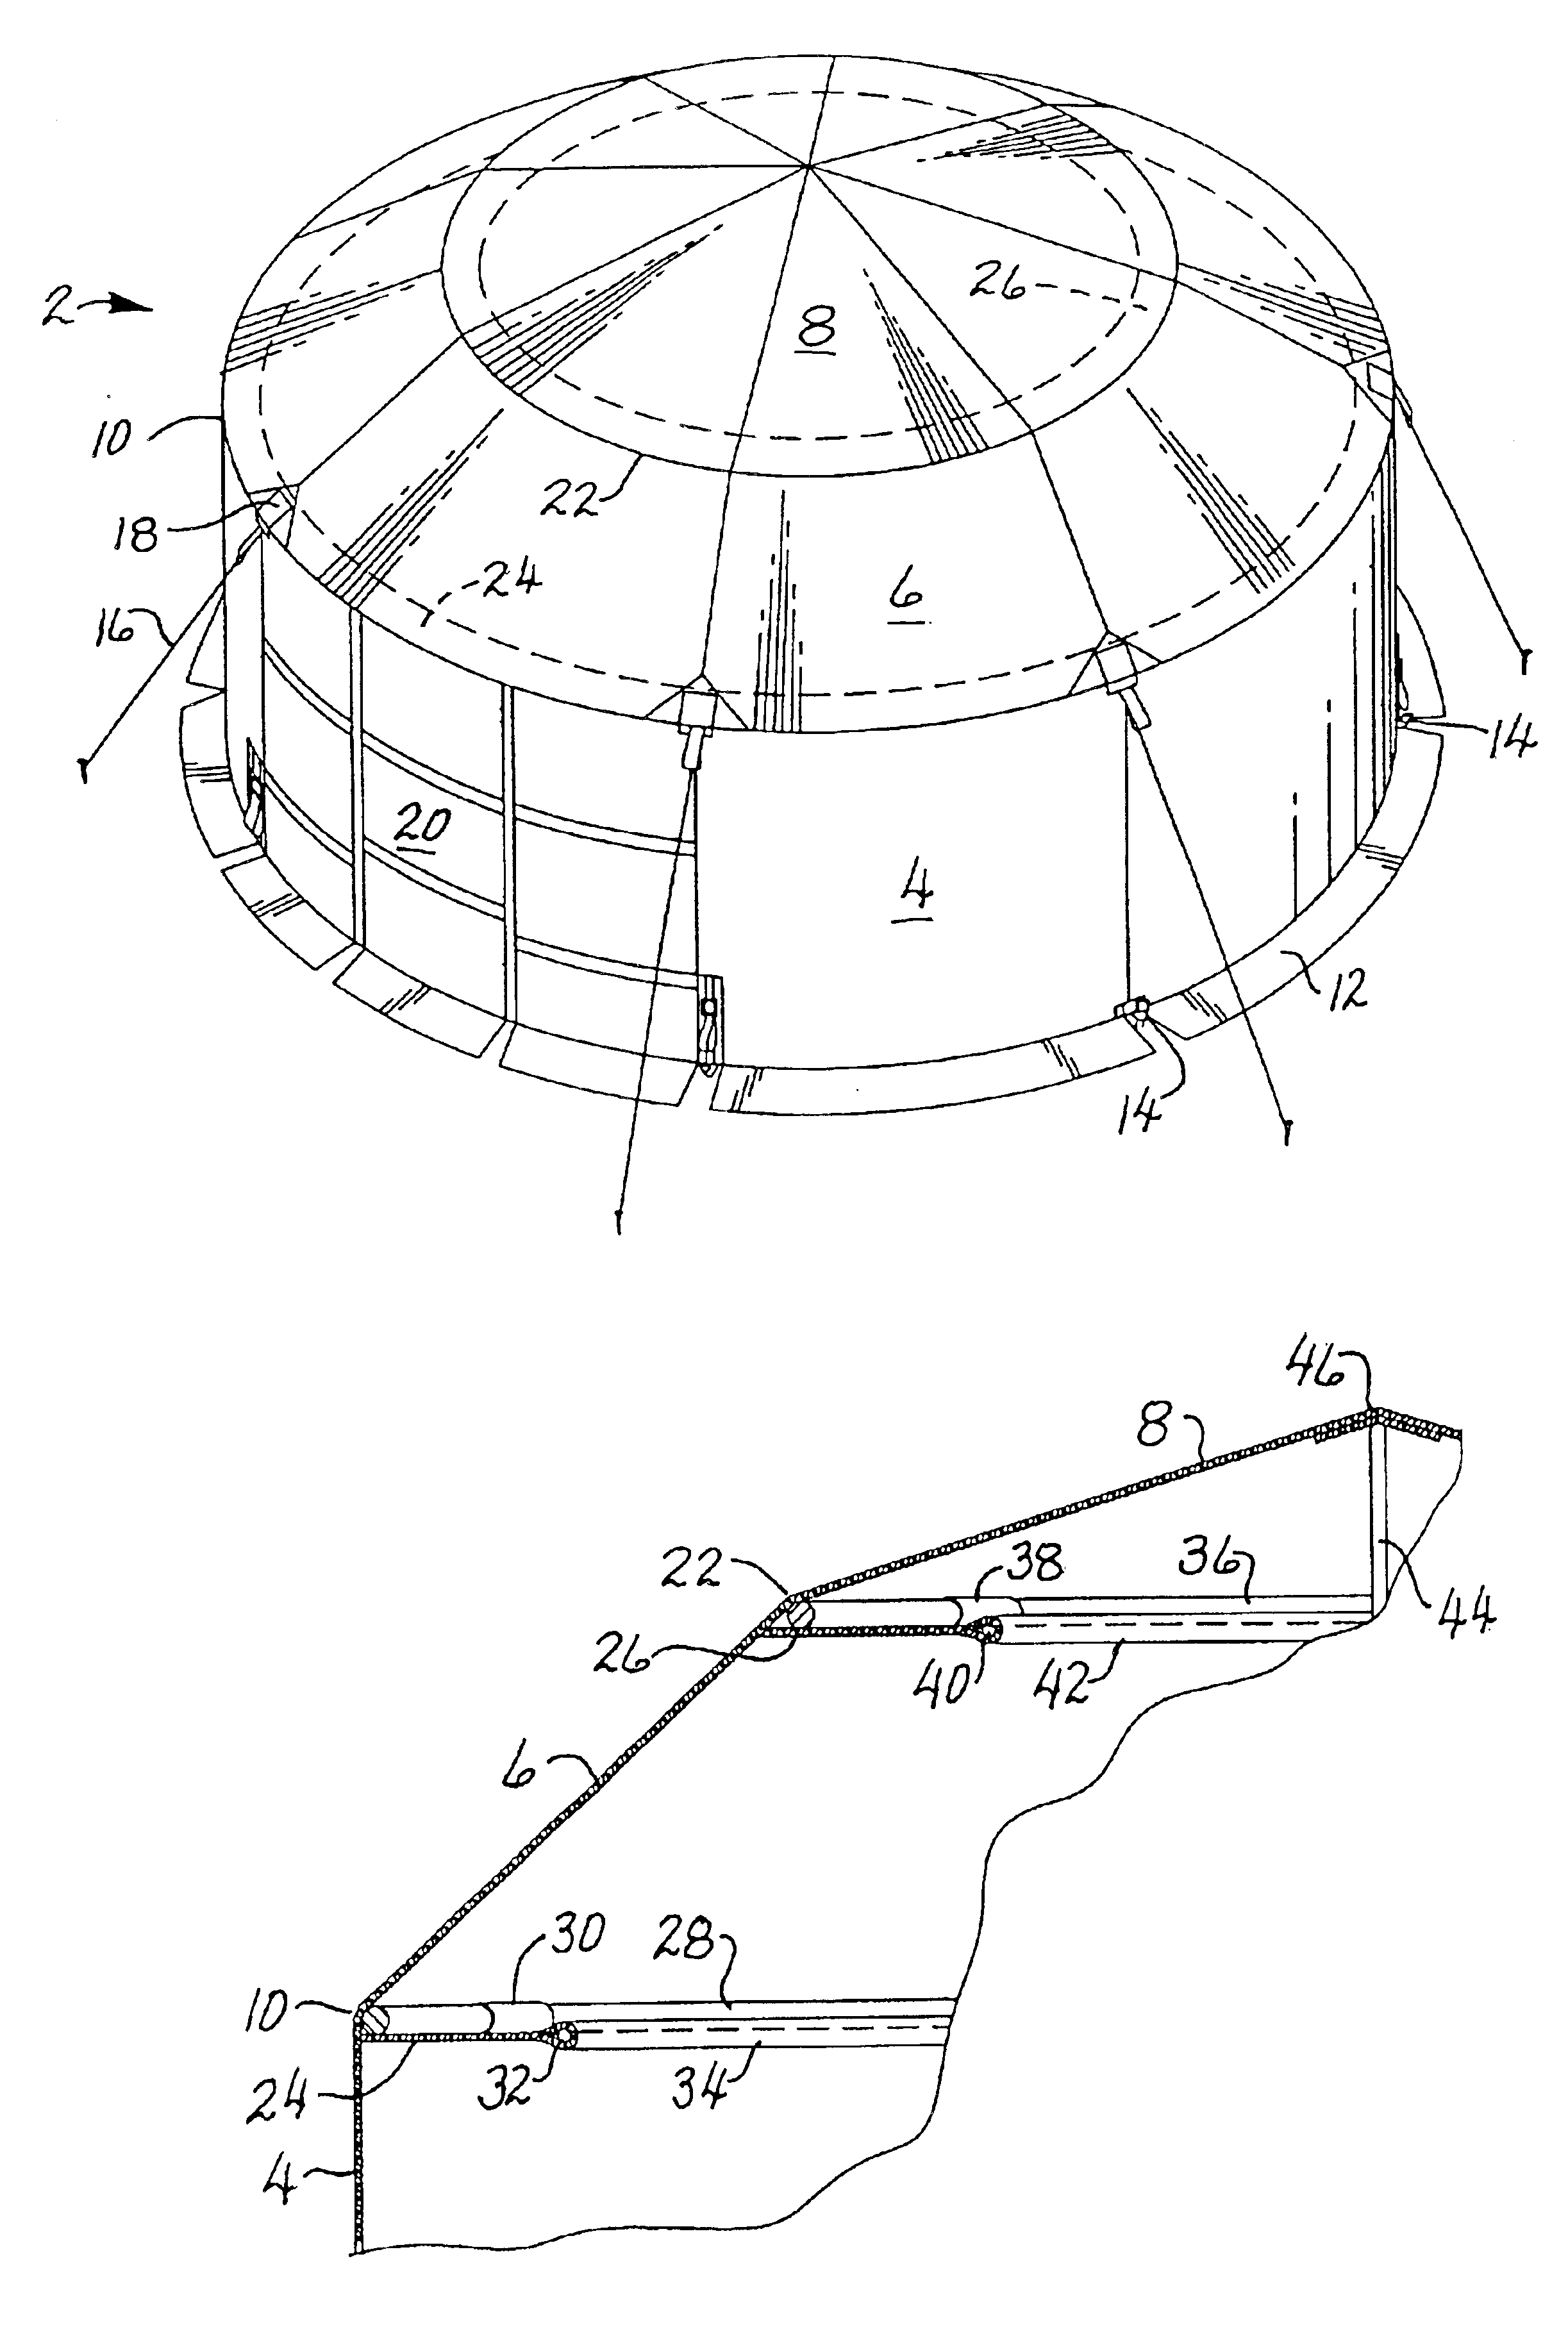 Tent and support system for same